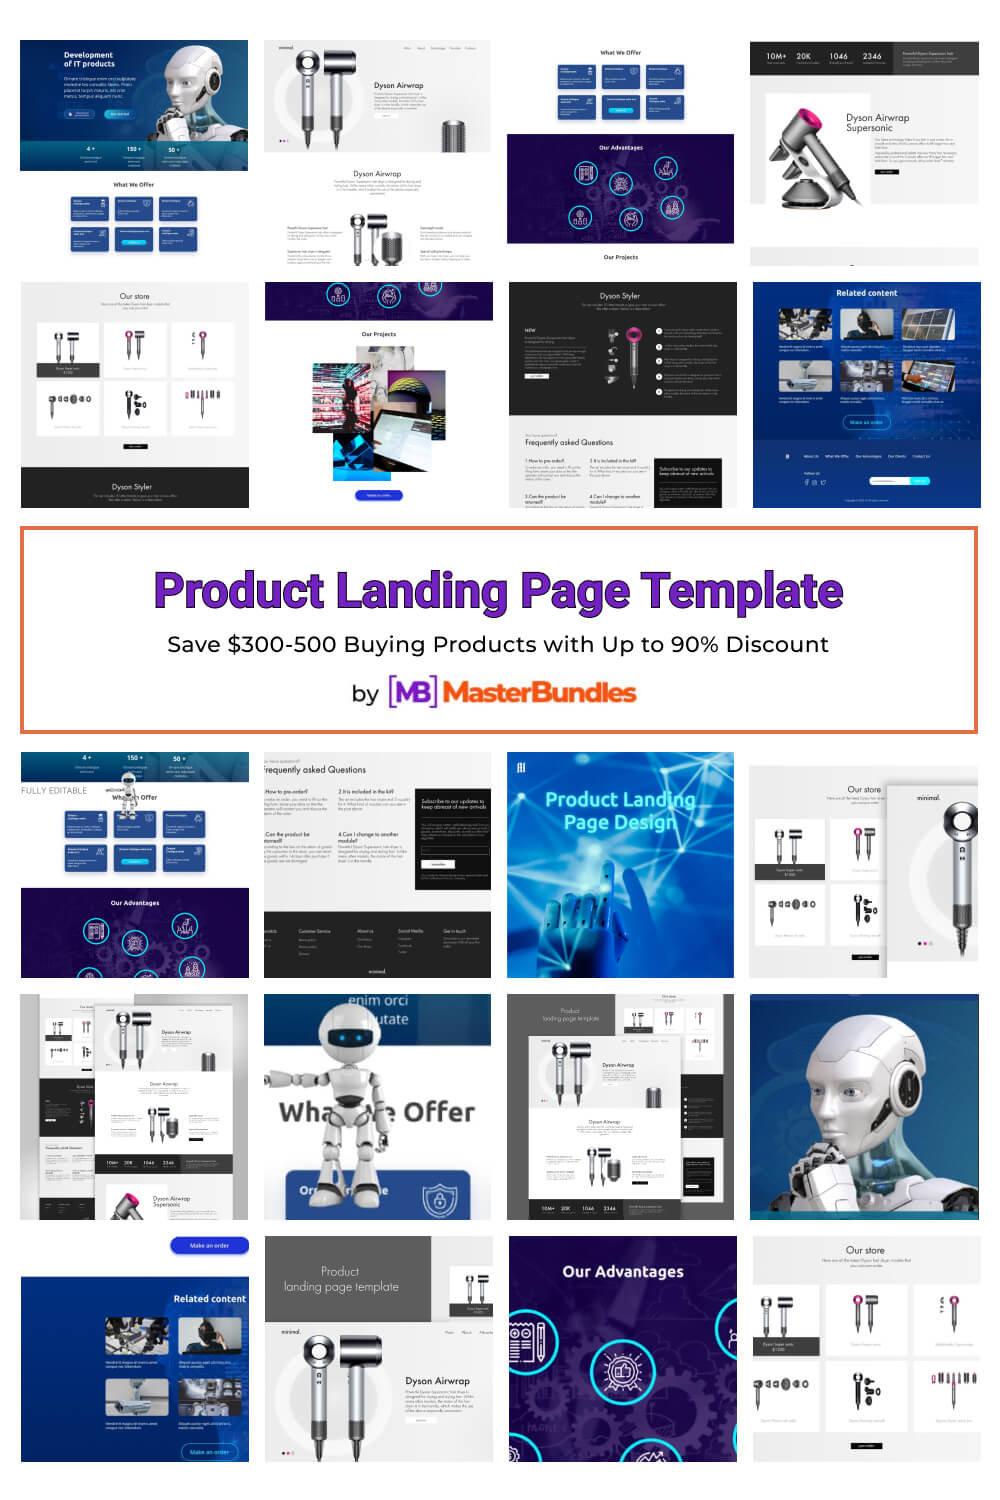 product landing page template pinterest image.